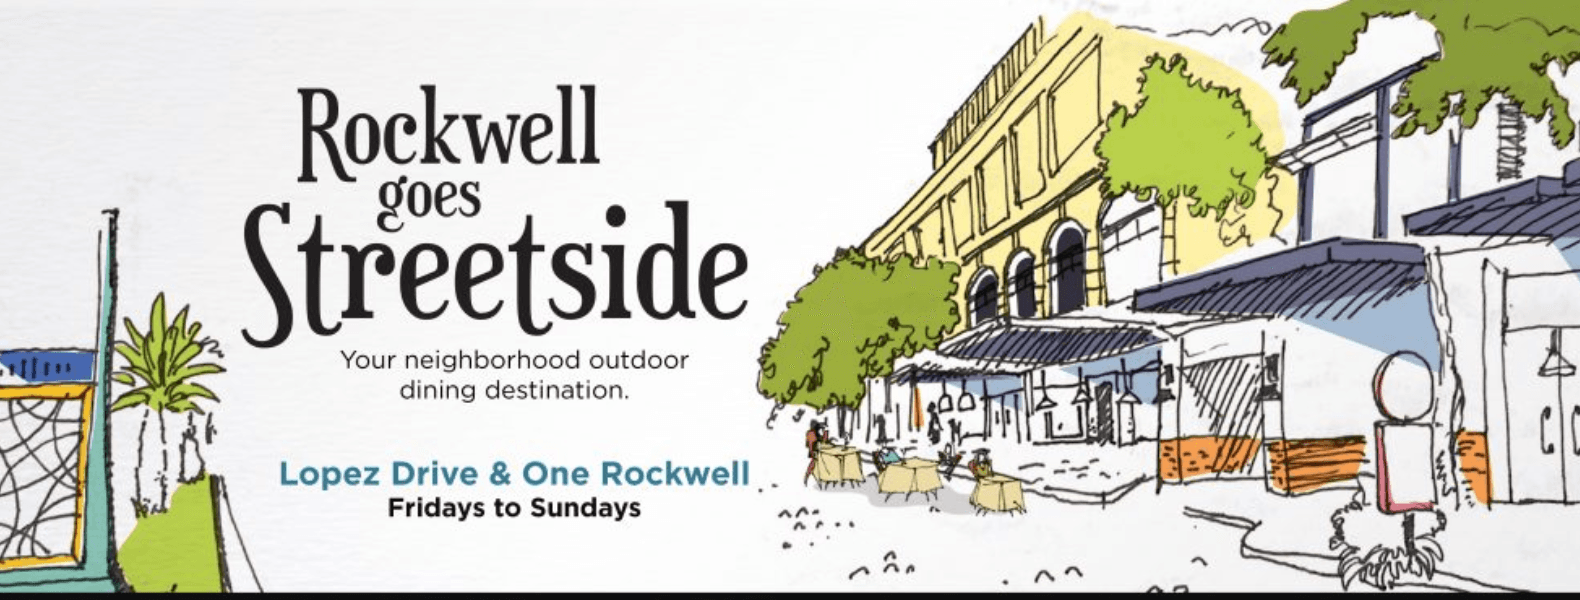 Rockwell launches street side al fresco dining